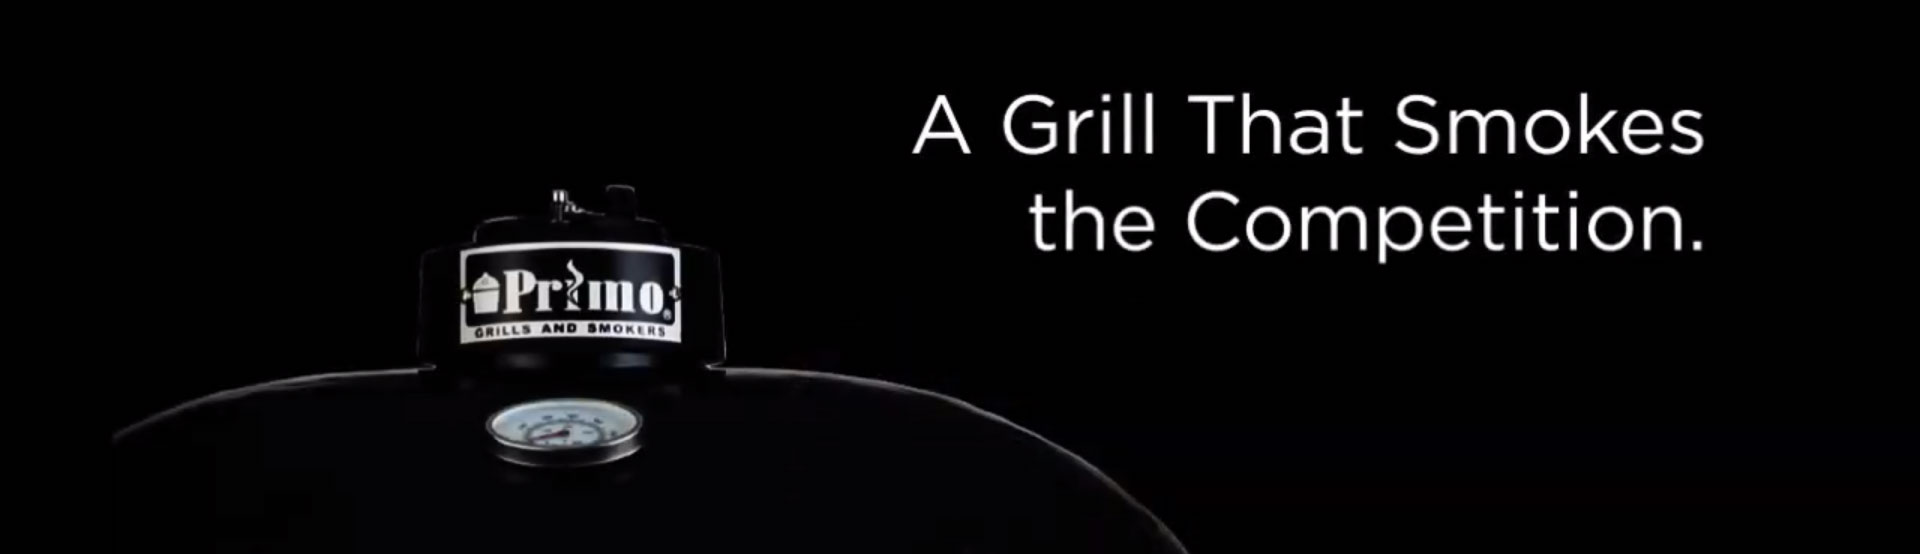 A Grill that smokes the competition